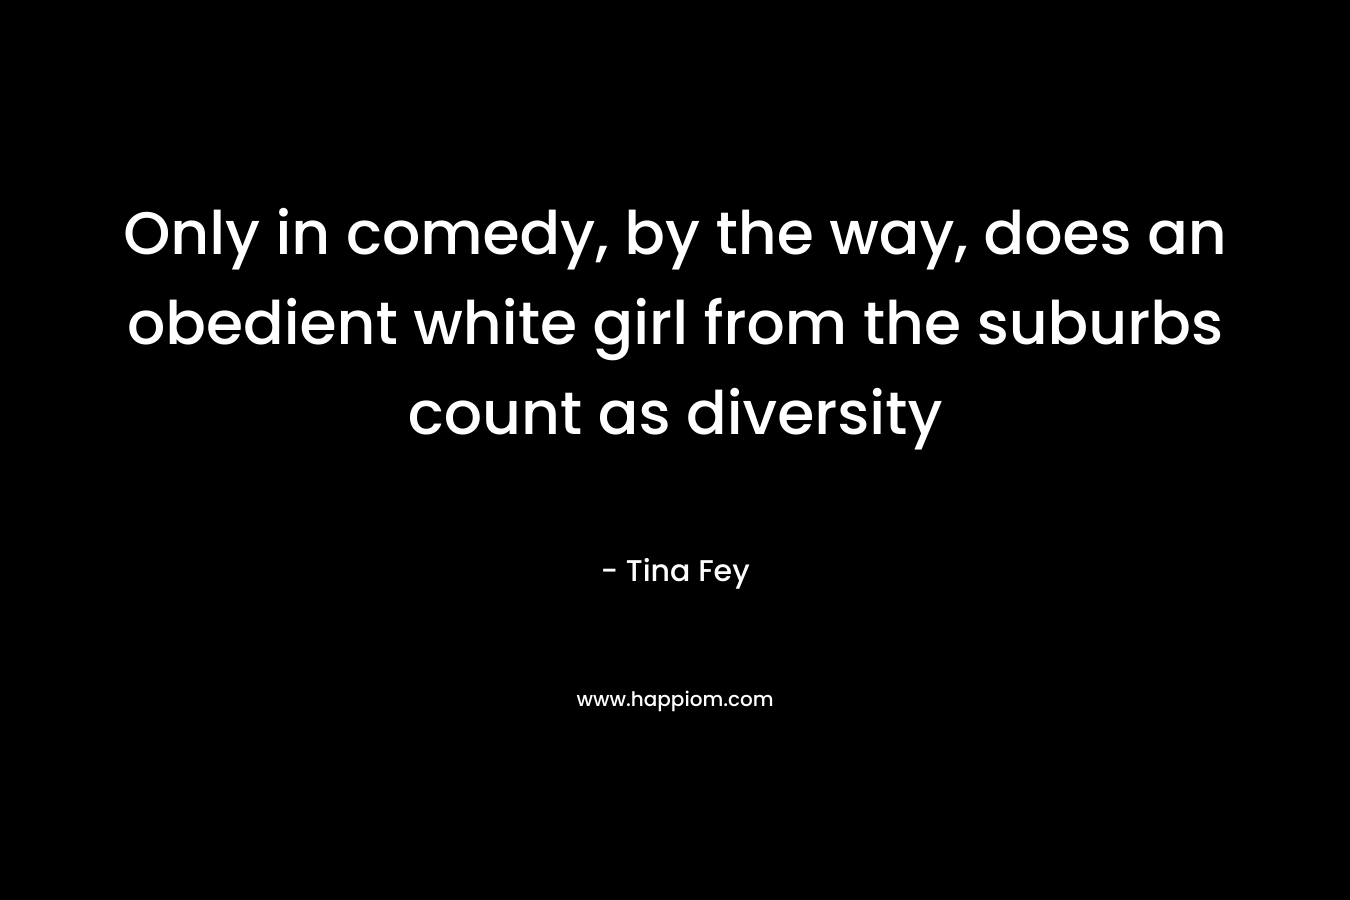 Only in comedy, by the way, does an obedient white girl from the suburbs count as diversity – Tina Fey